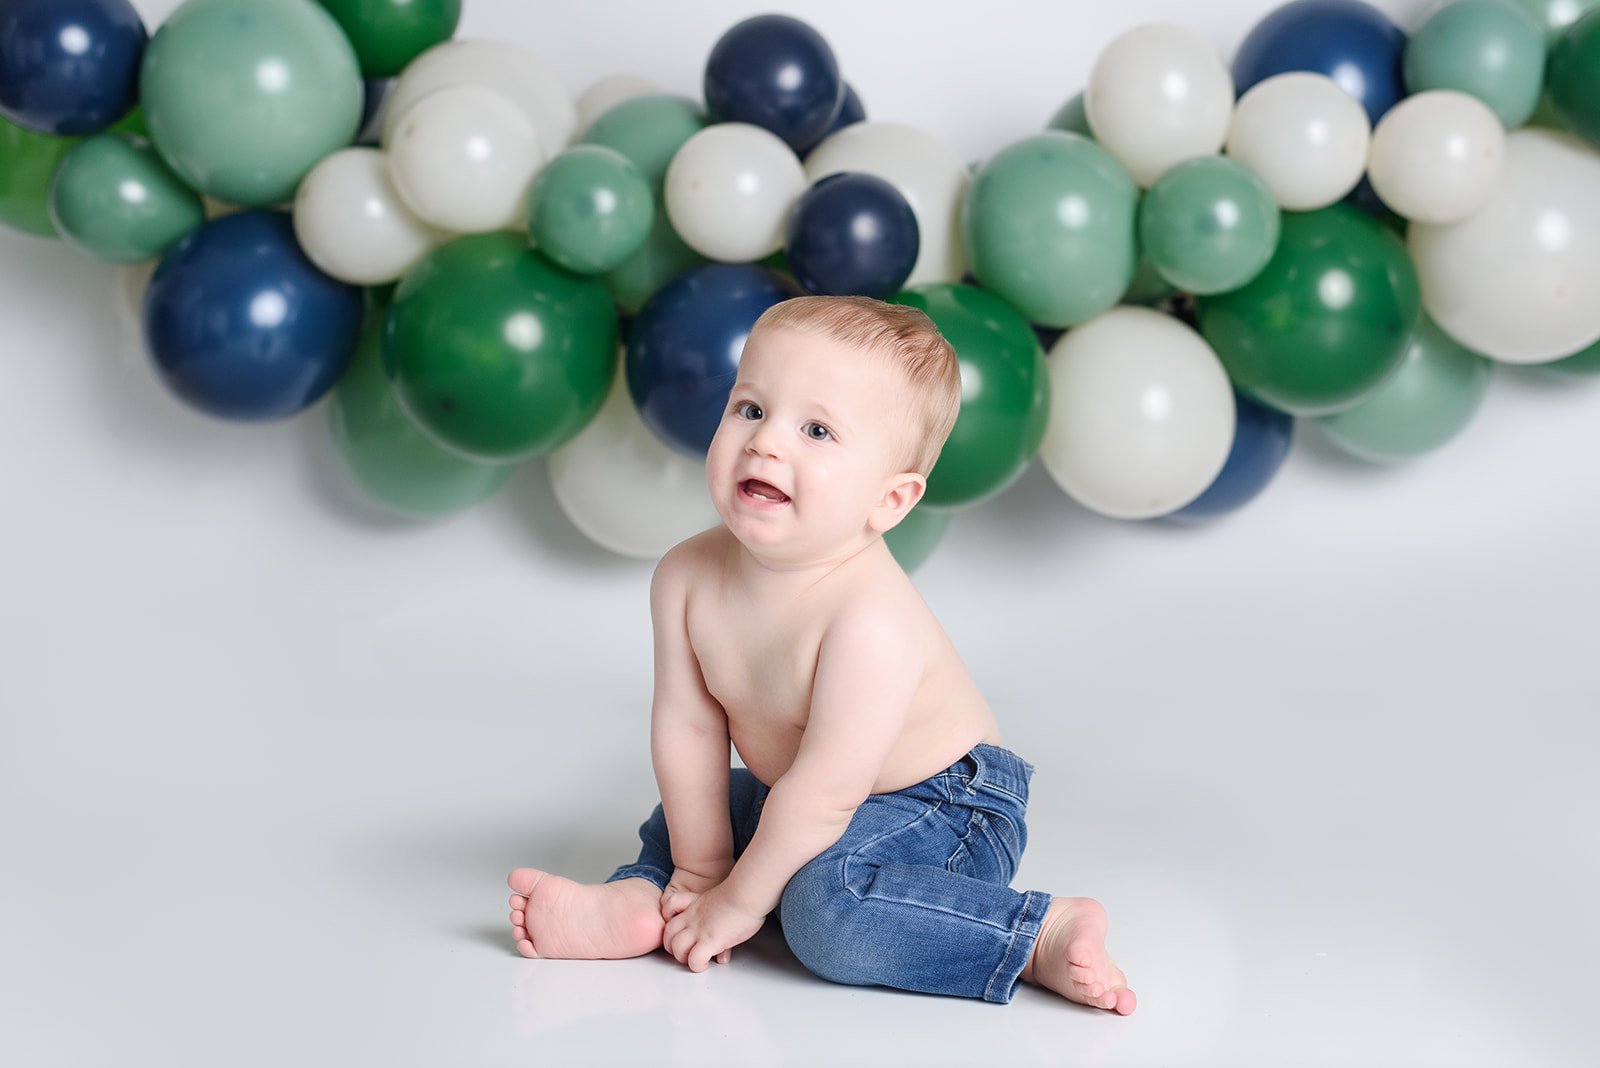 balloons fill the background as a baby celebrates turning one year old